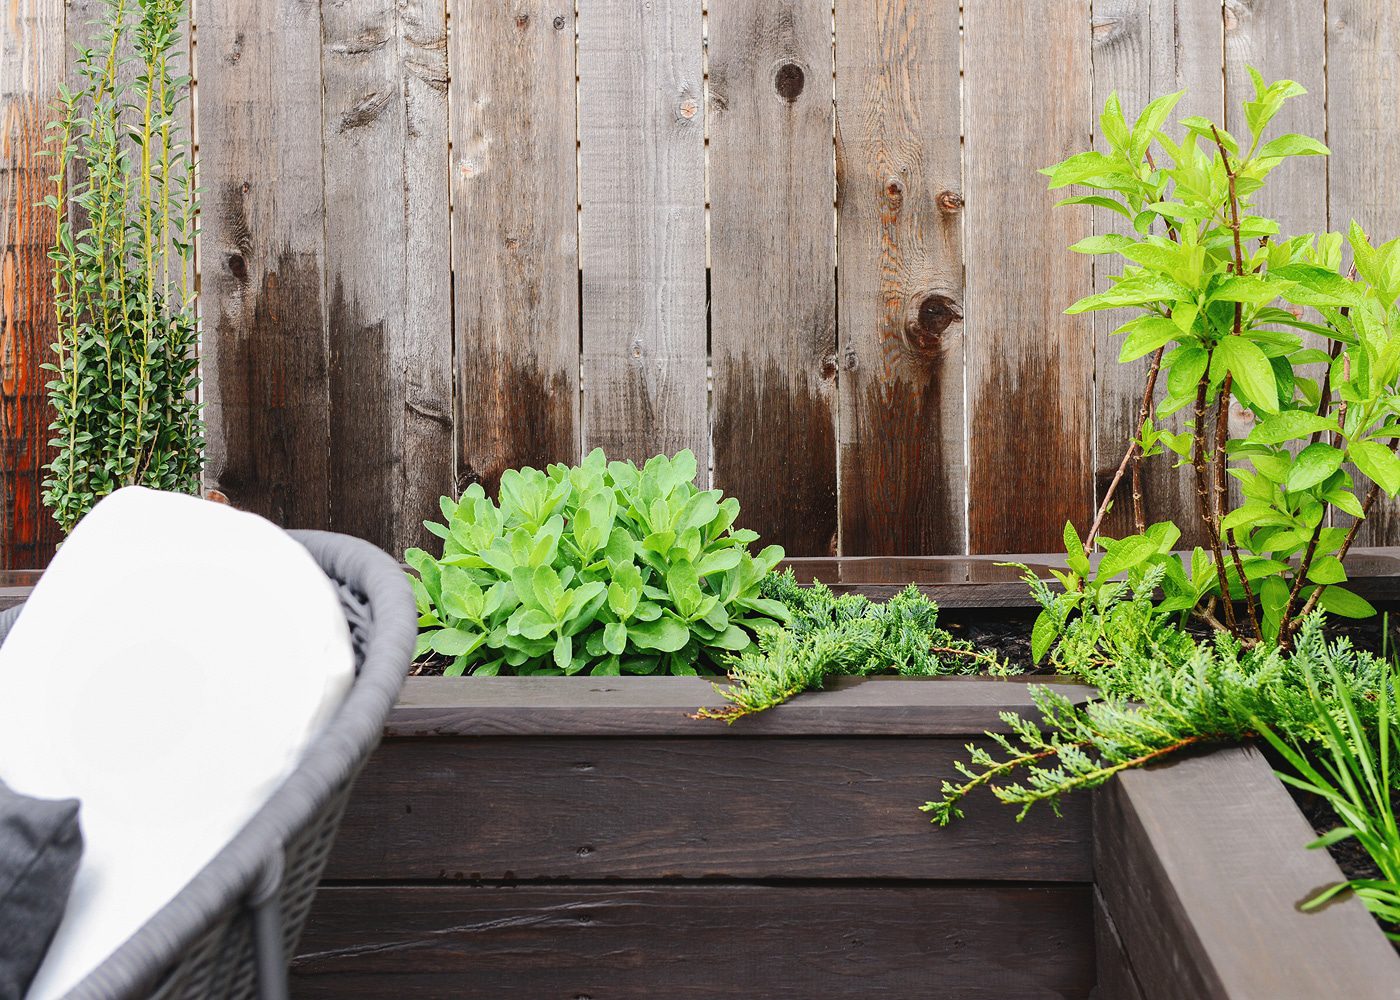 Our Planter Boxes: After a Chicago Winter